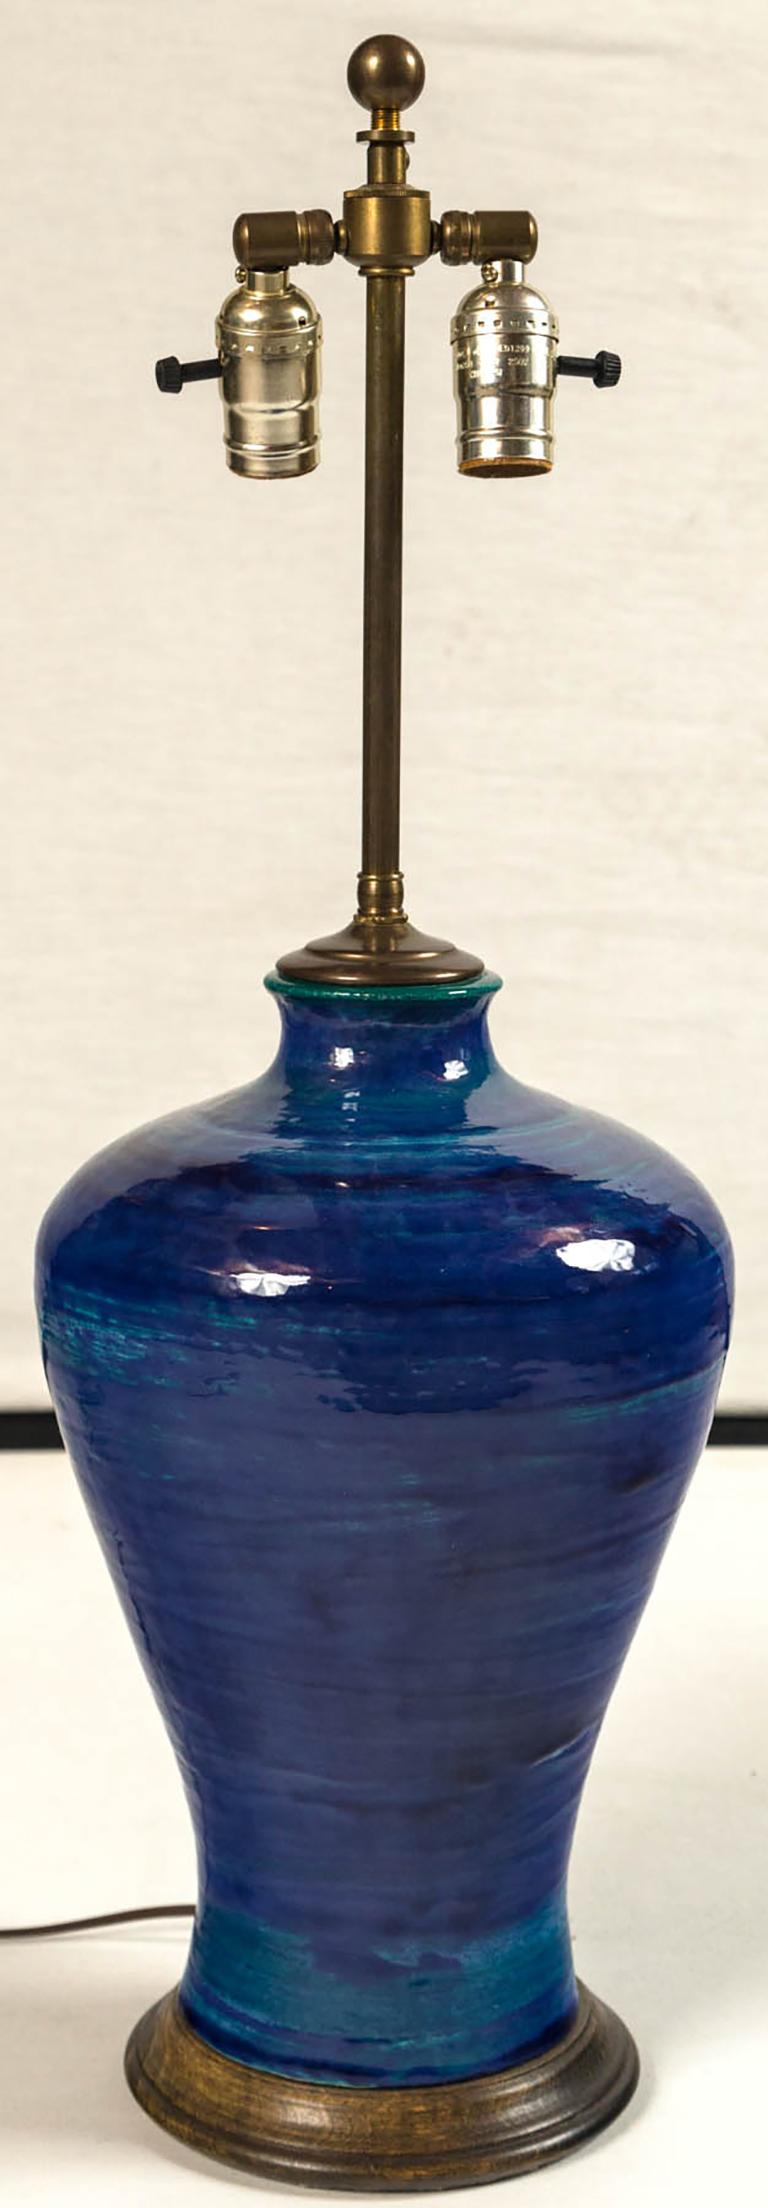 Ombre glazed ceramic table lamp, 20th century. A richly glazed ceramic lamp in shades of dark to lighter blue. Turned wood base. Newly wired.